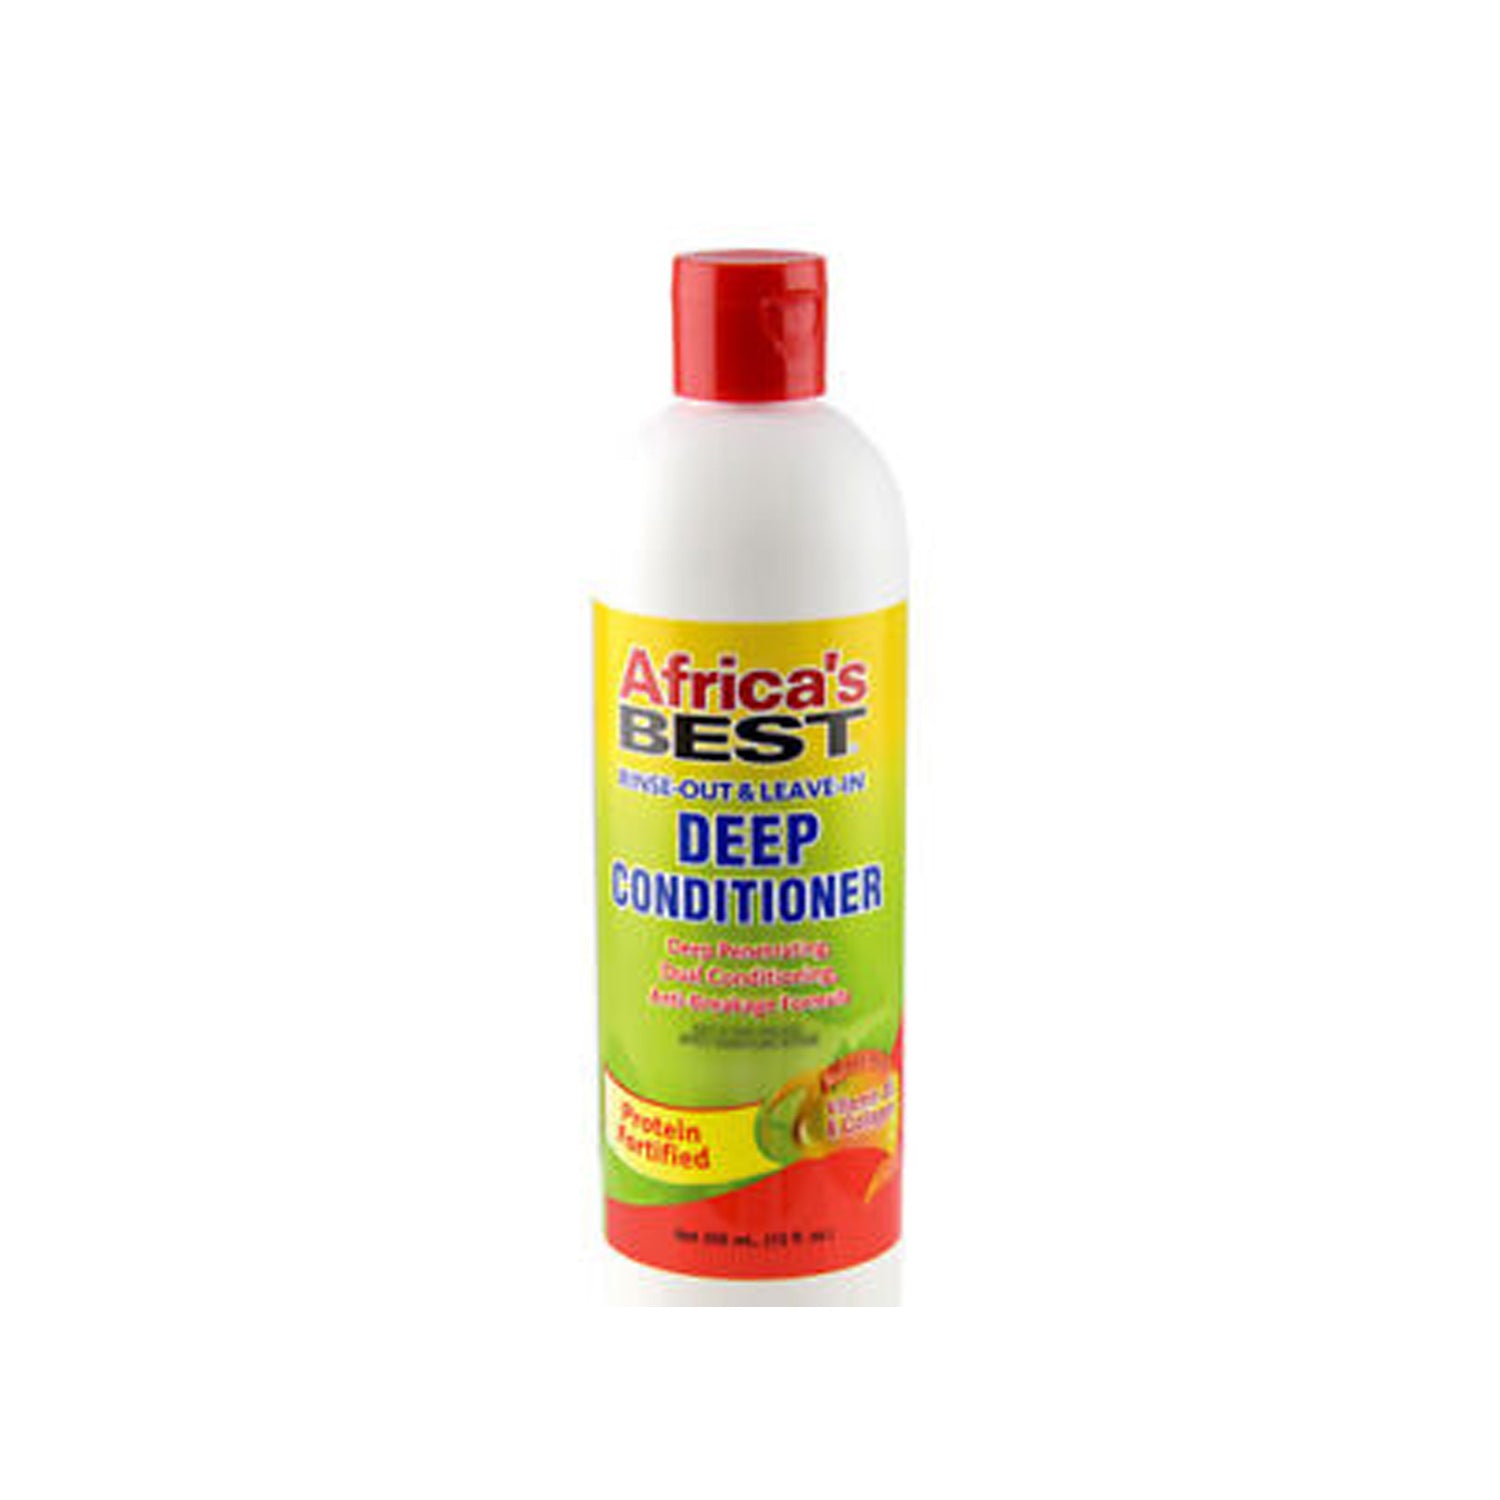 AFRICA'S BEST RINSE-OUT & LEAVE-IN DEEP CONDITIONER 12OZ.